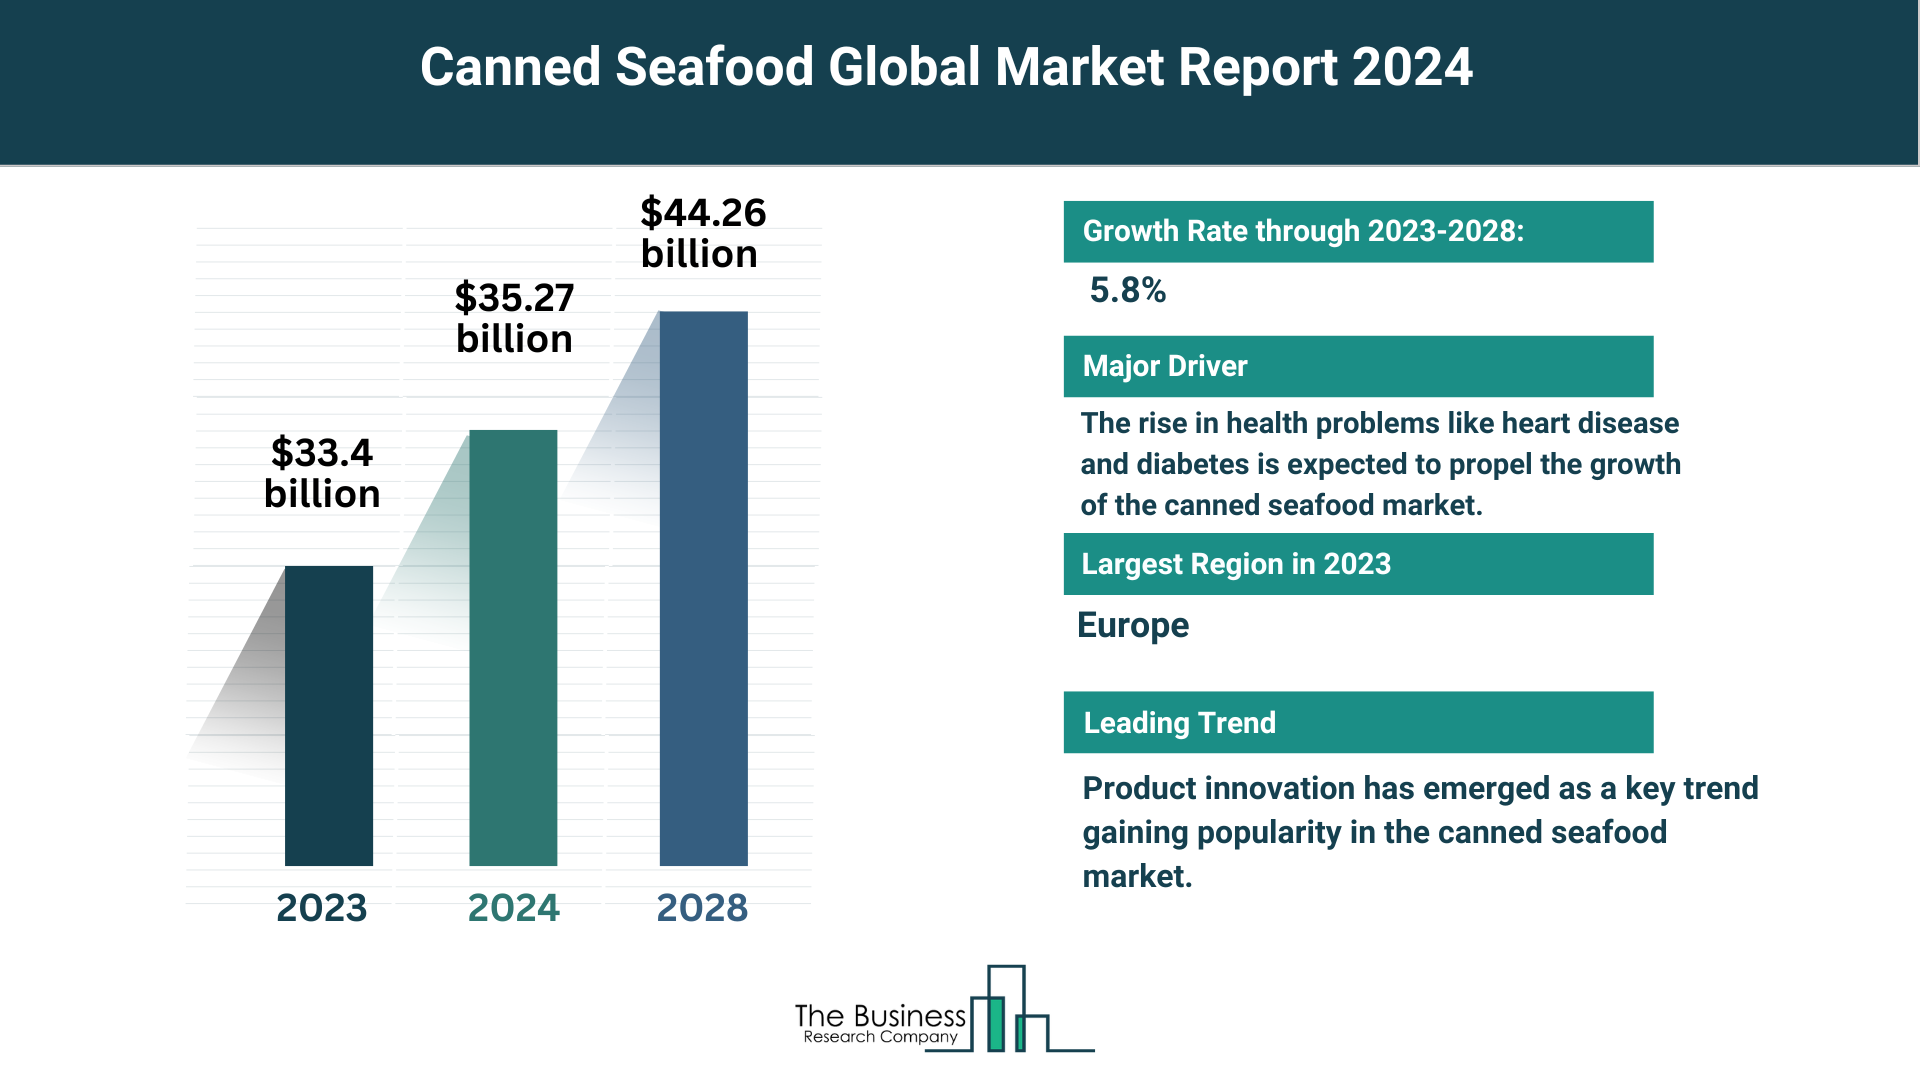 Global Canned Seafood Market